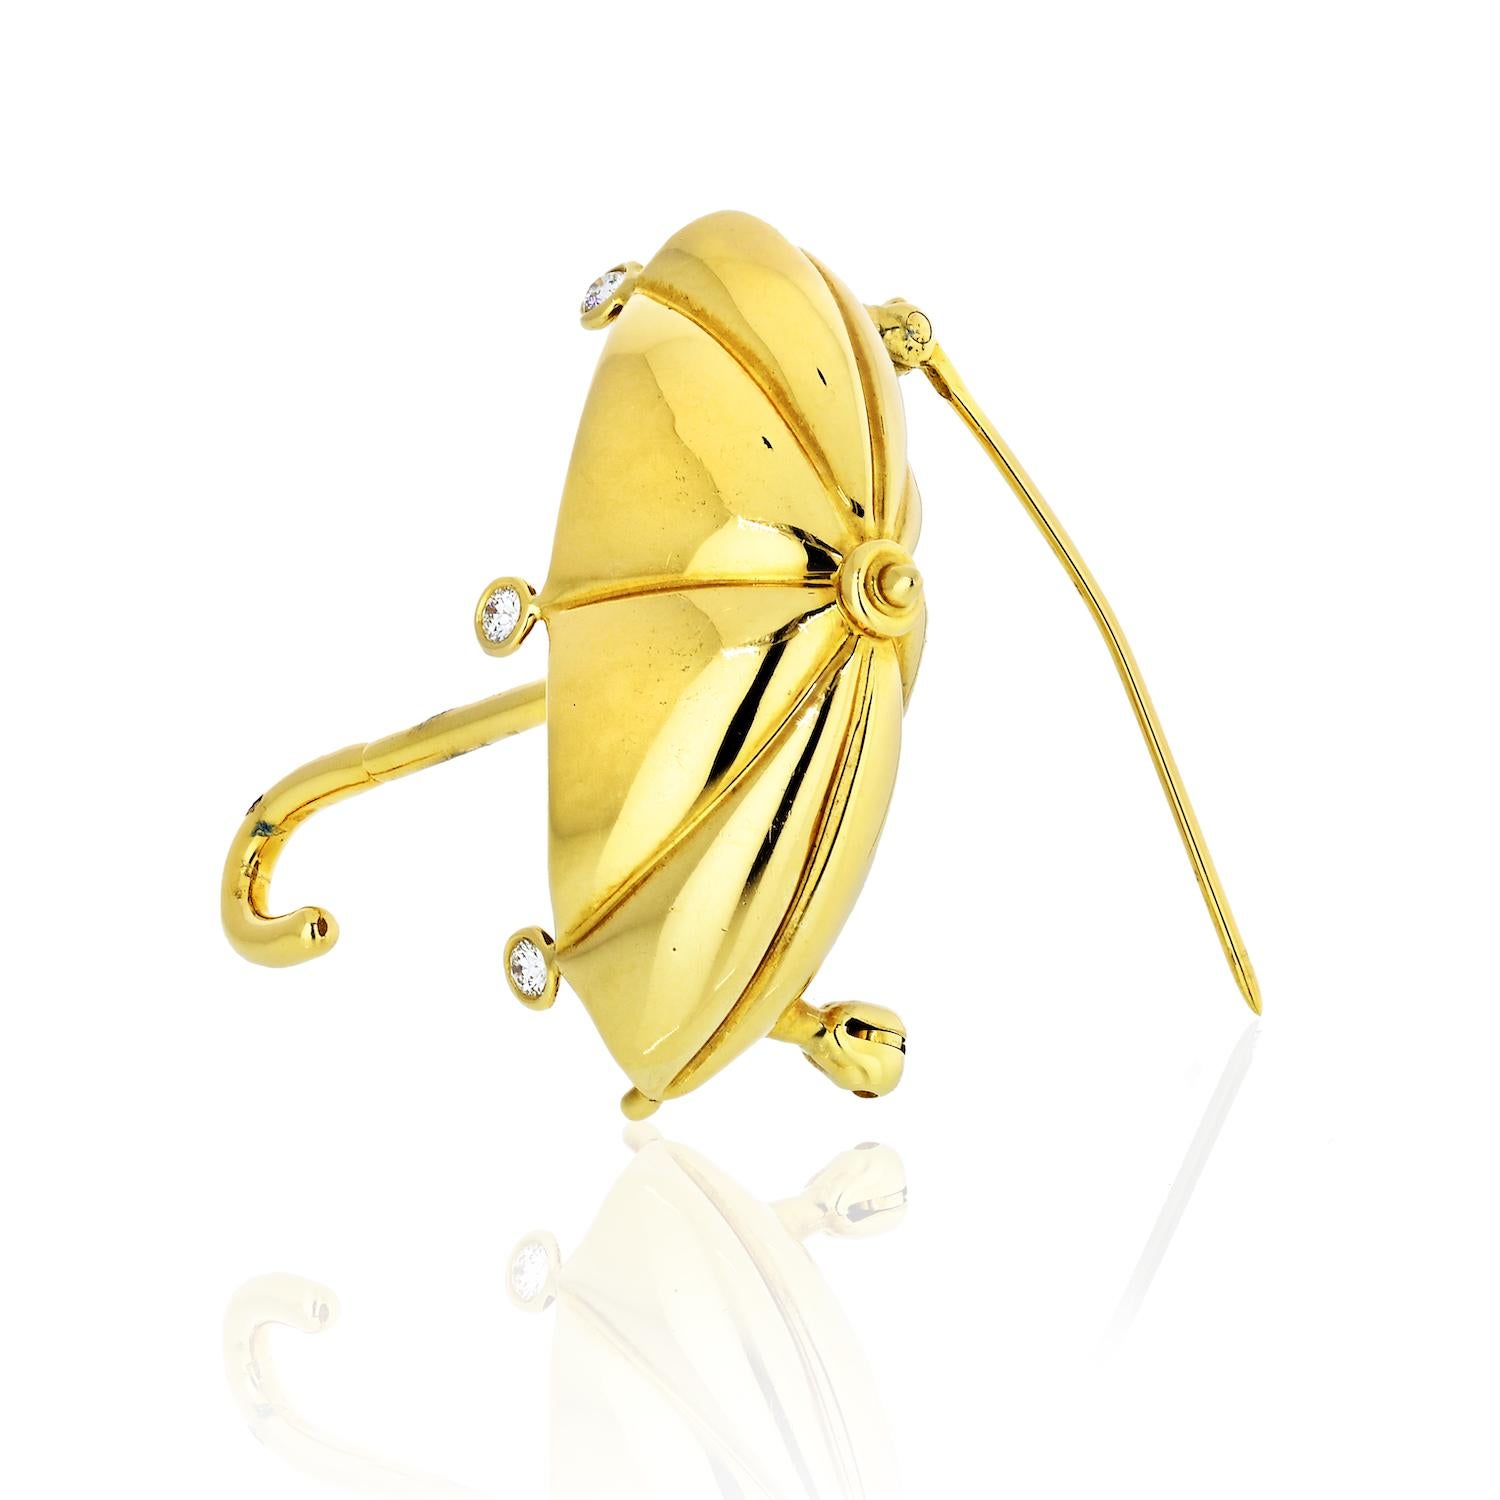 An 18k yellow gold umbrella brooch set with approximately 0.09ctw of G/VS diamonds.

DESIGNER: Tiffany & Co
MATERIAL: Gold
DIMENSIONS: 44mm x 37mm
WEIGHT: 15.2 grams
MARKED/TESTED: Tiffany & Co, 750
CONDITION: Estate
44mmm long.
